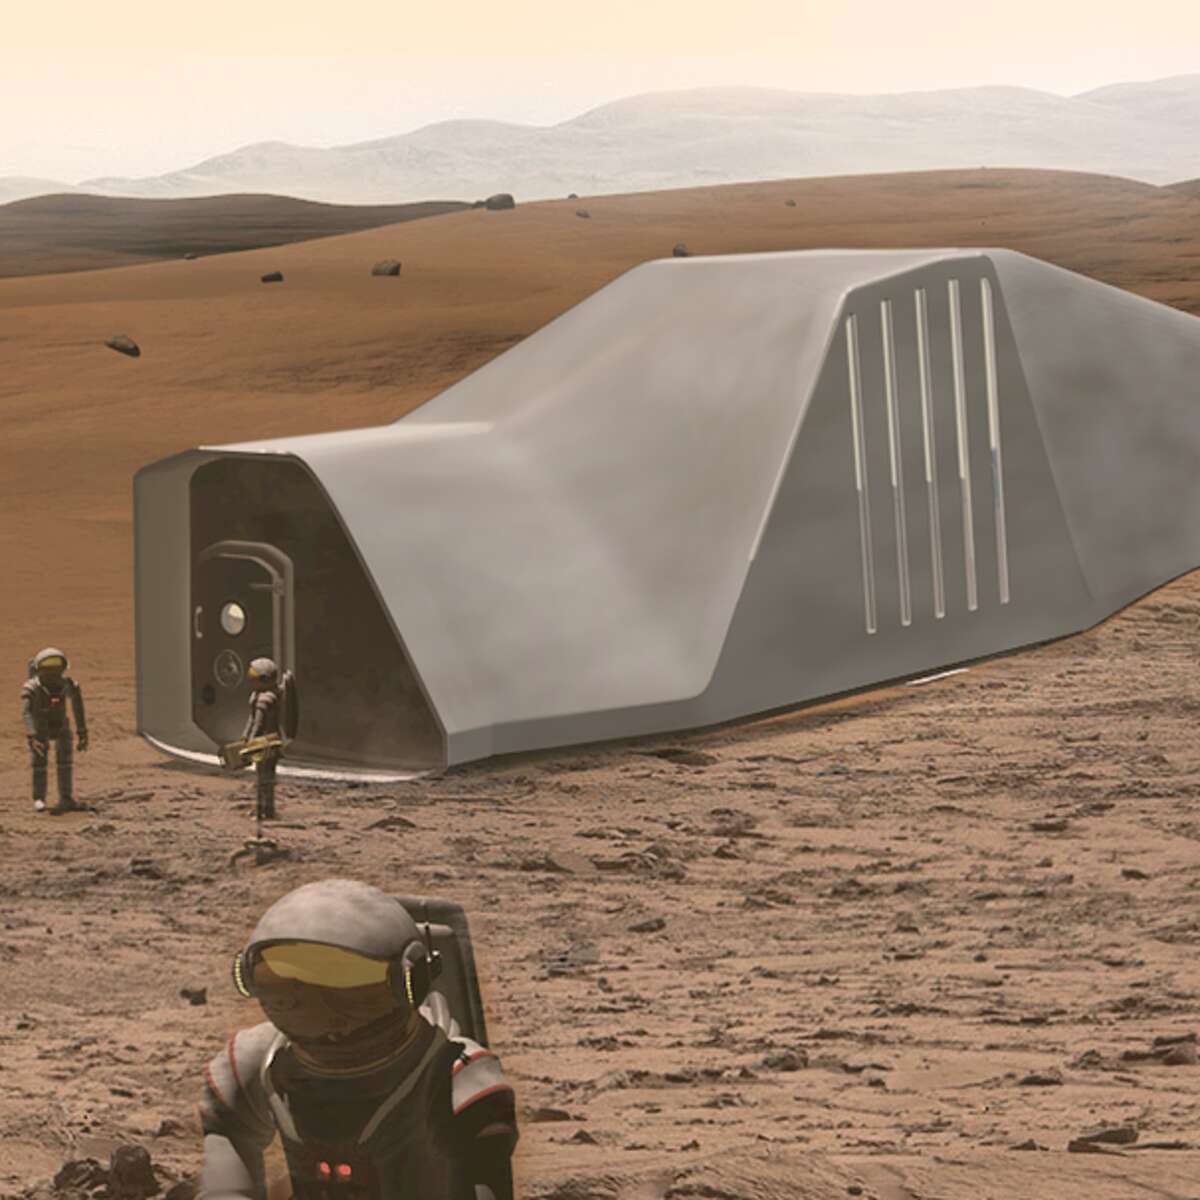 Architectural concepts for NASA's "3D-Printed Habitat Challenge," a competition created by NASA to judge design concepts of Mars settlements.